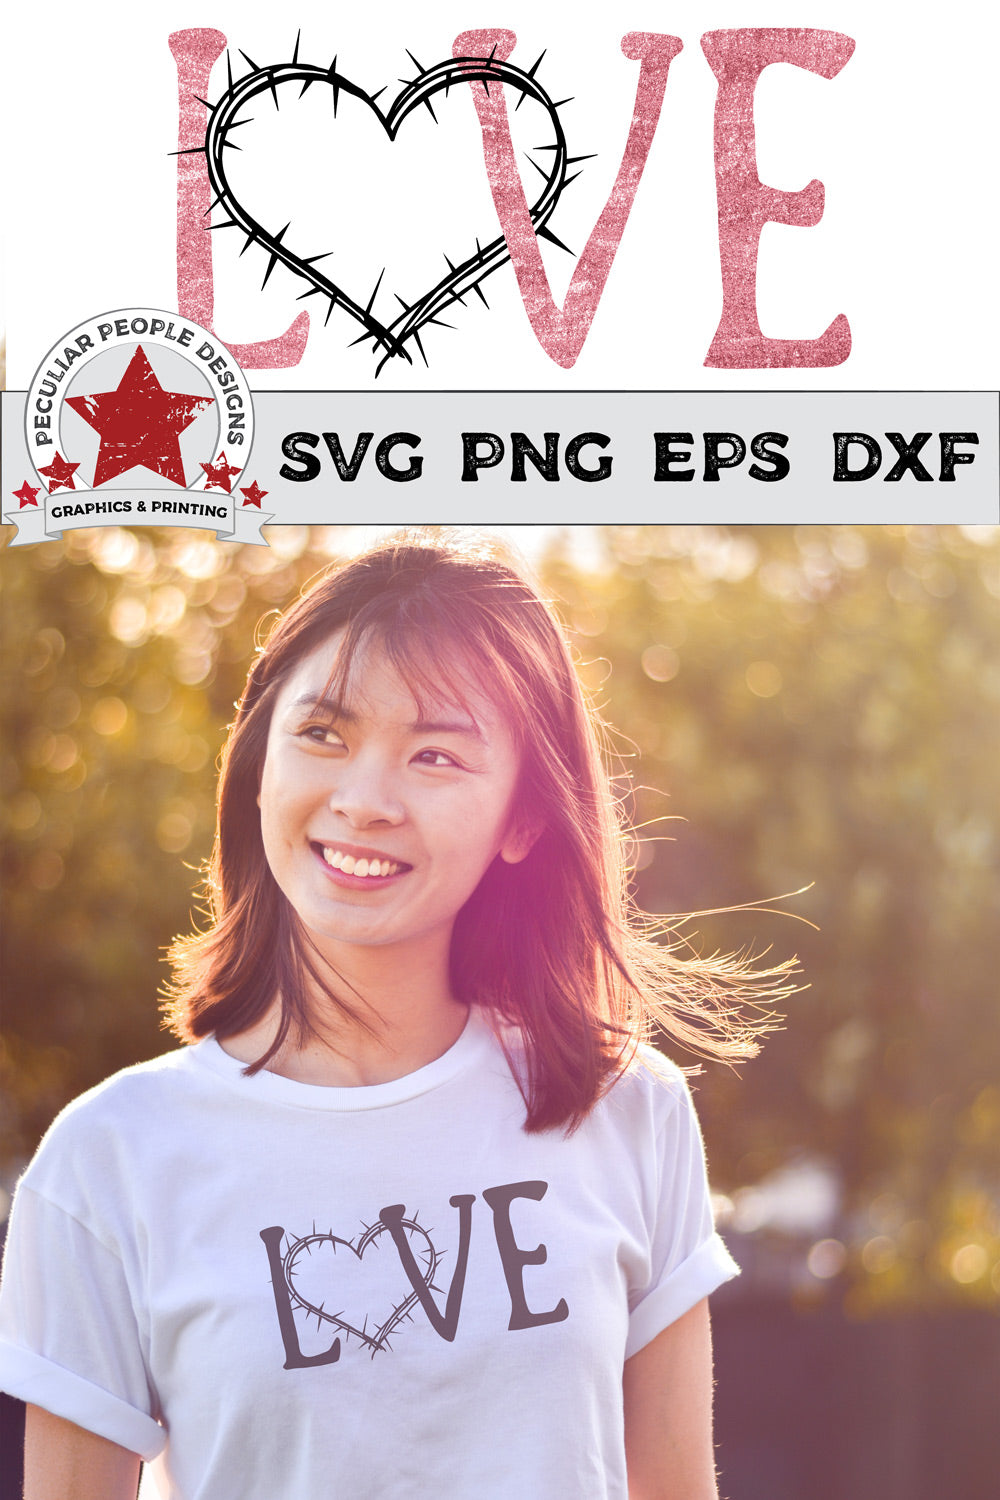 
                  
                    A young girl wearing a white tee with Love-Crown-of-Thorns-SVG printed on her shirt
                  
                